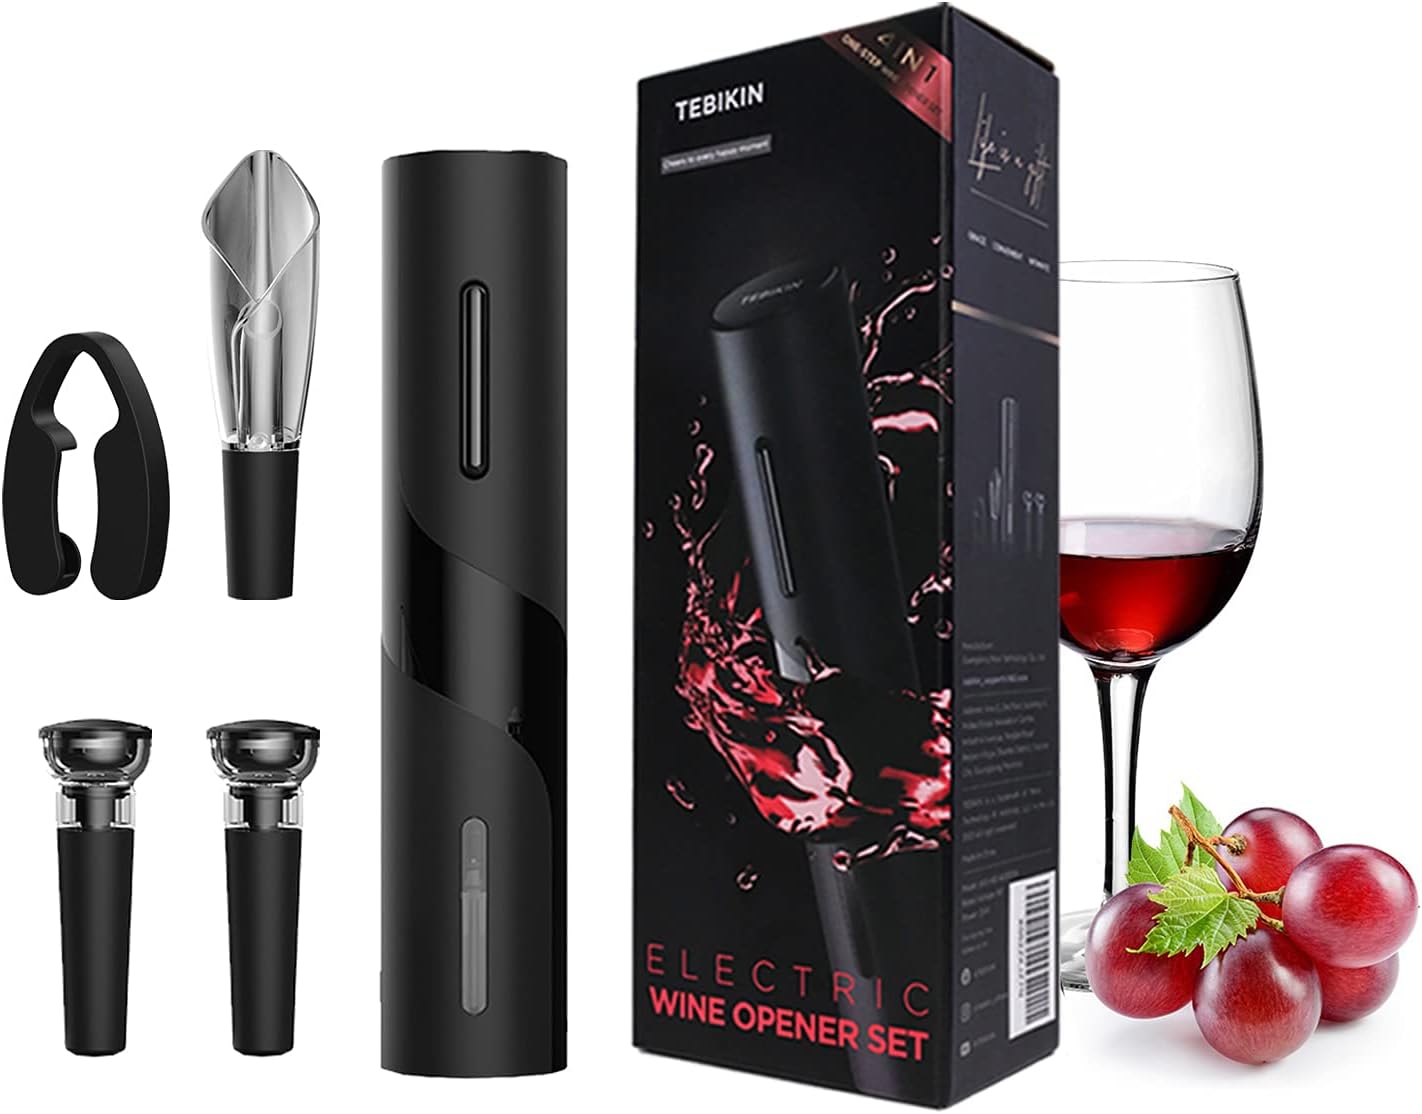 Electric Wine Opener Set TEBIKIN Automatic Wine Bottle Openers Cordless Battery Powered Corkscrew with Vacuum Wine Stoppers Wine Aerator Pourer Foil Cutter for Home Gift Party Valentines Day